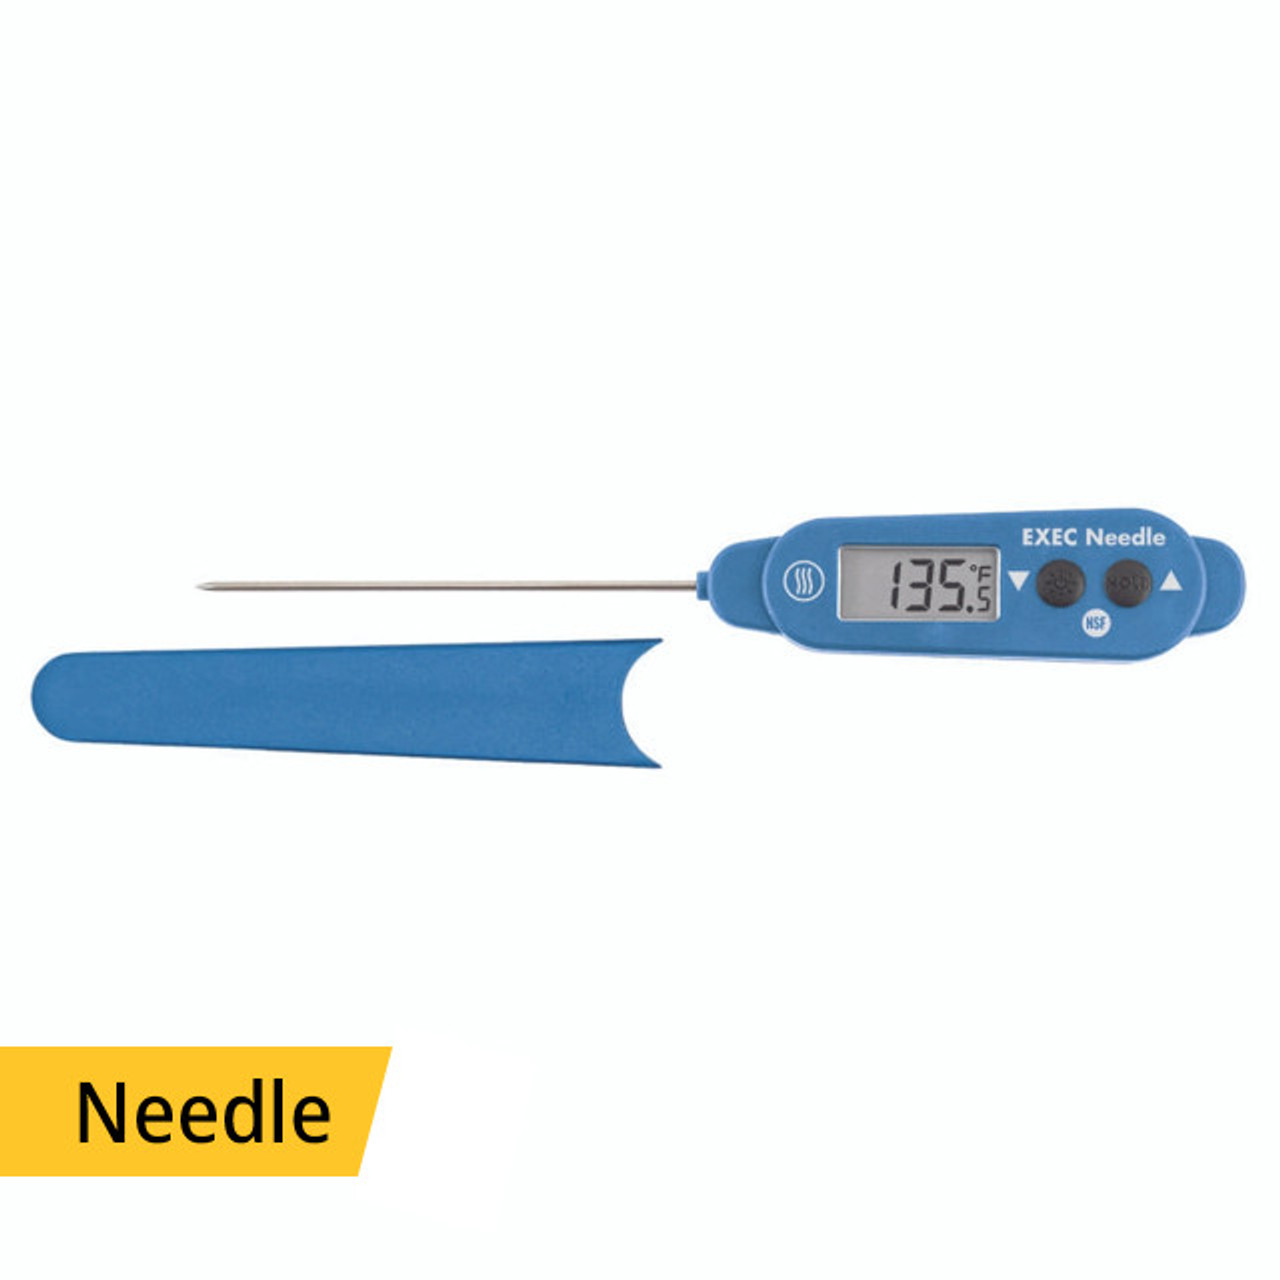 EXEC Needle™ Thermometer - Special - ThermoWorks